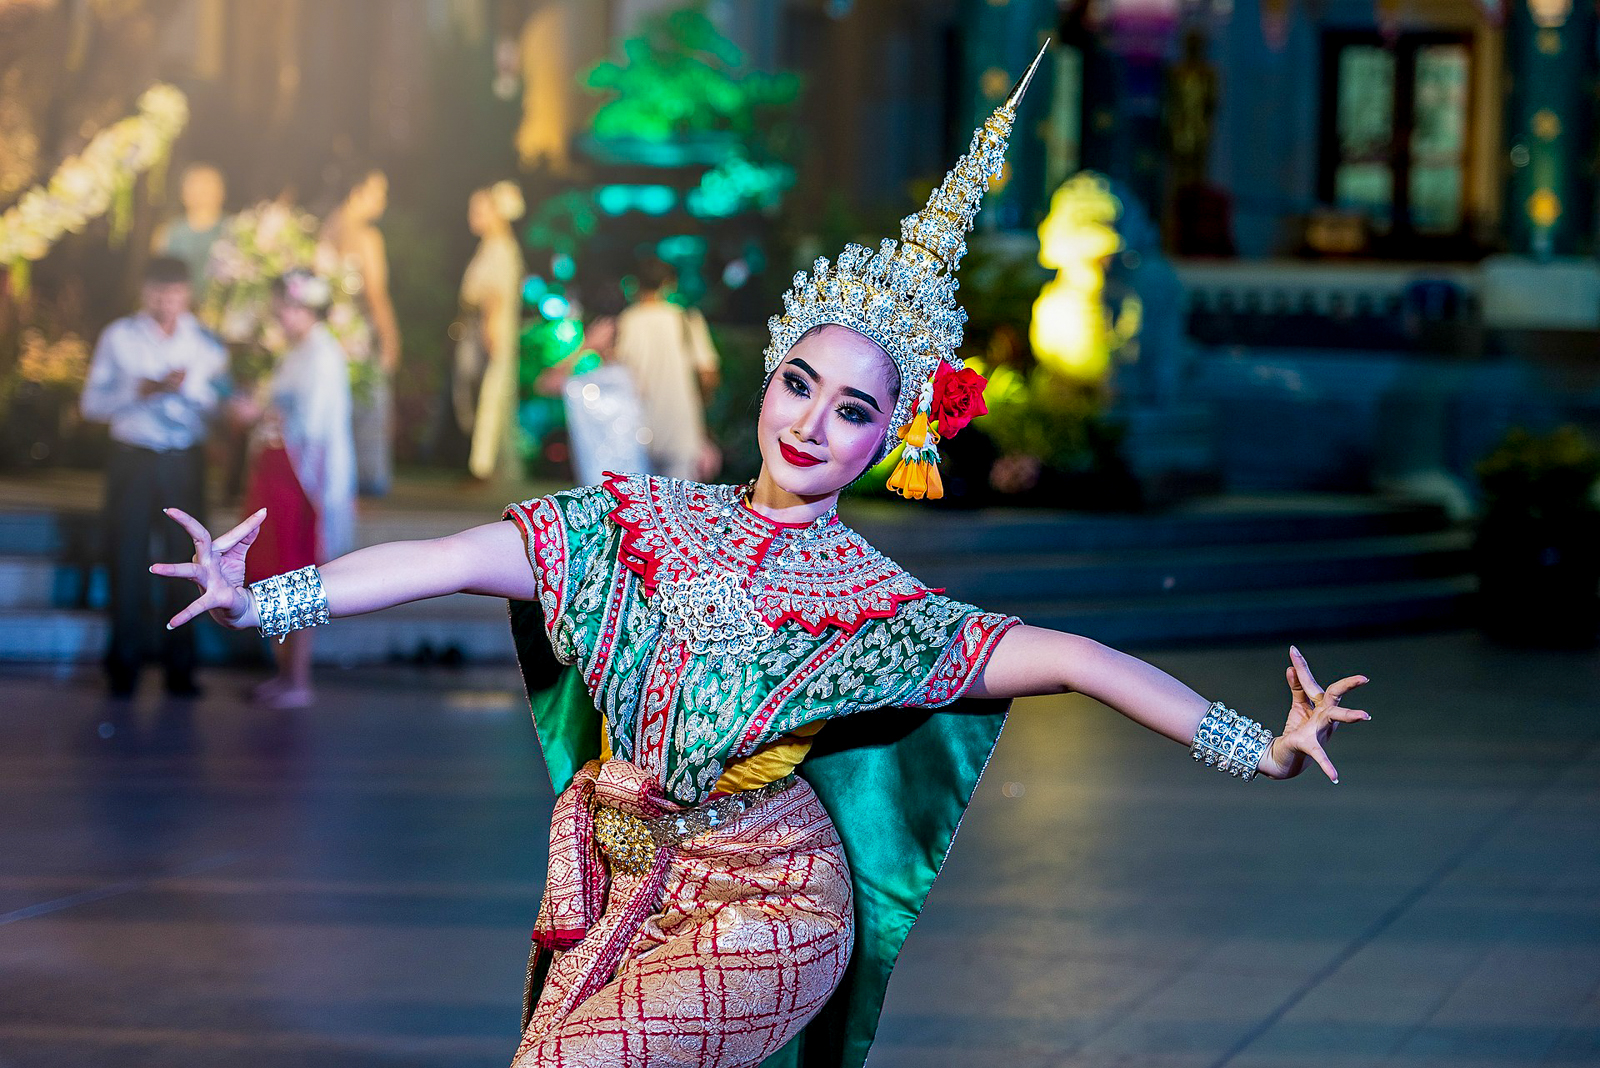 A dancer at the Ramayana Festival in Indonesia